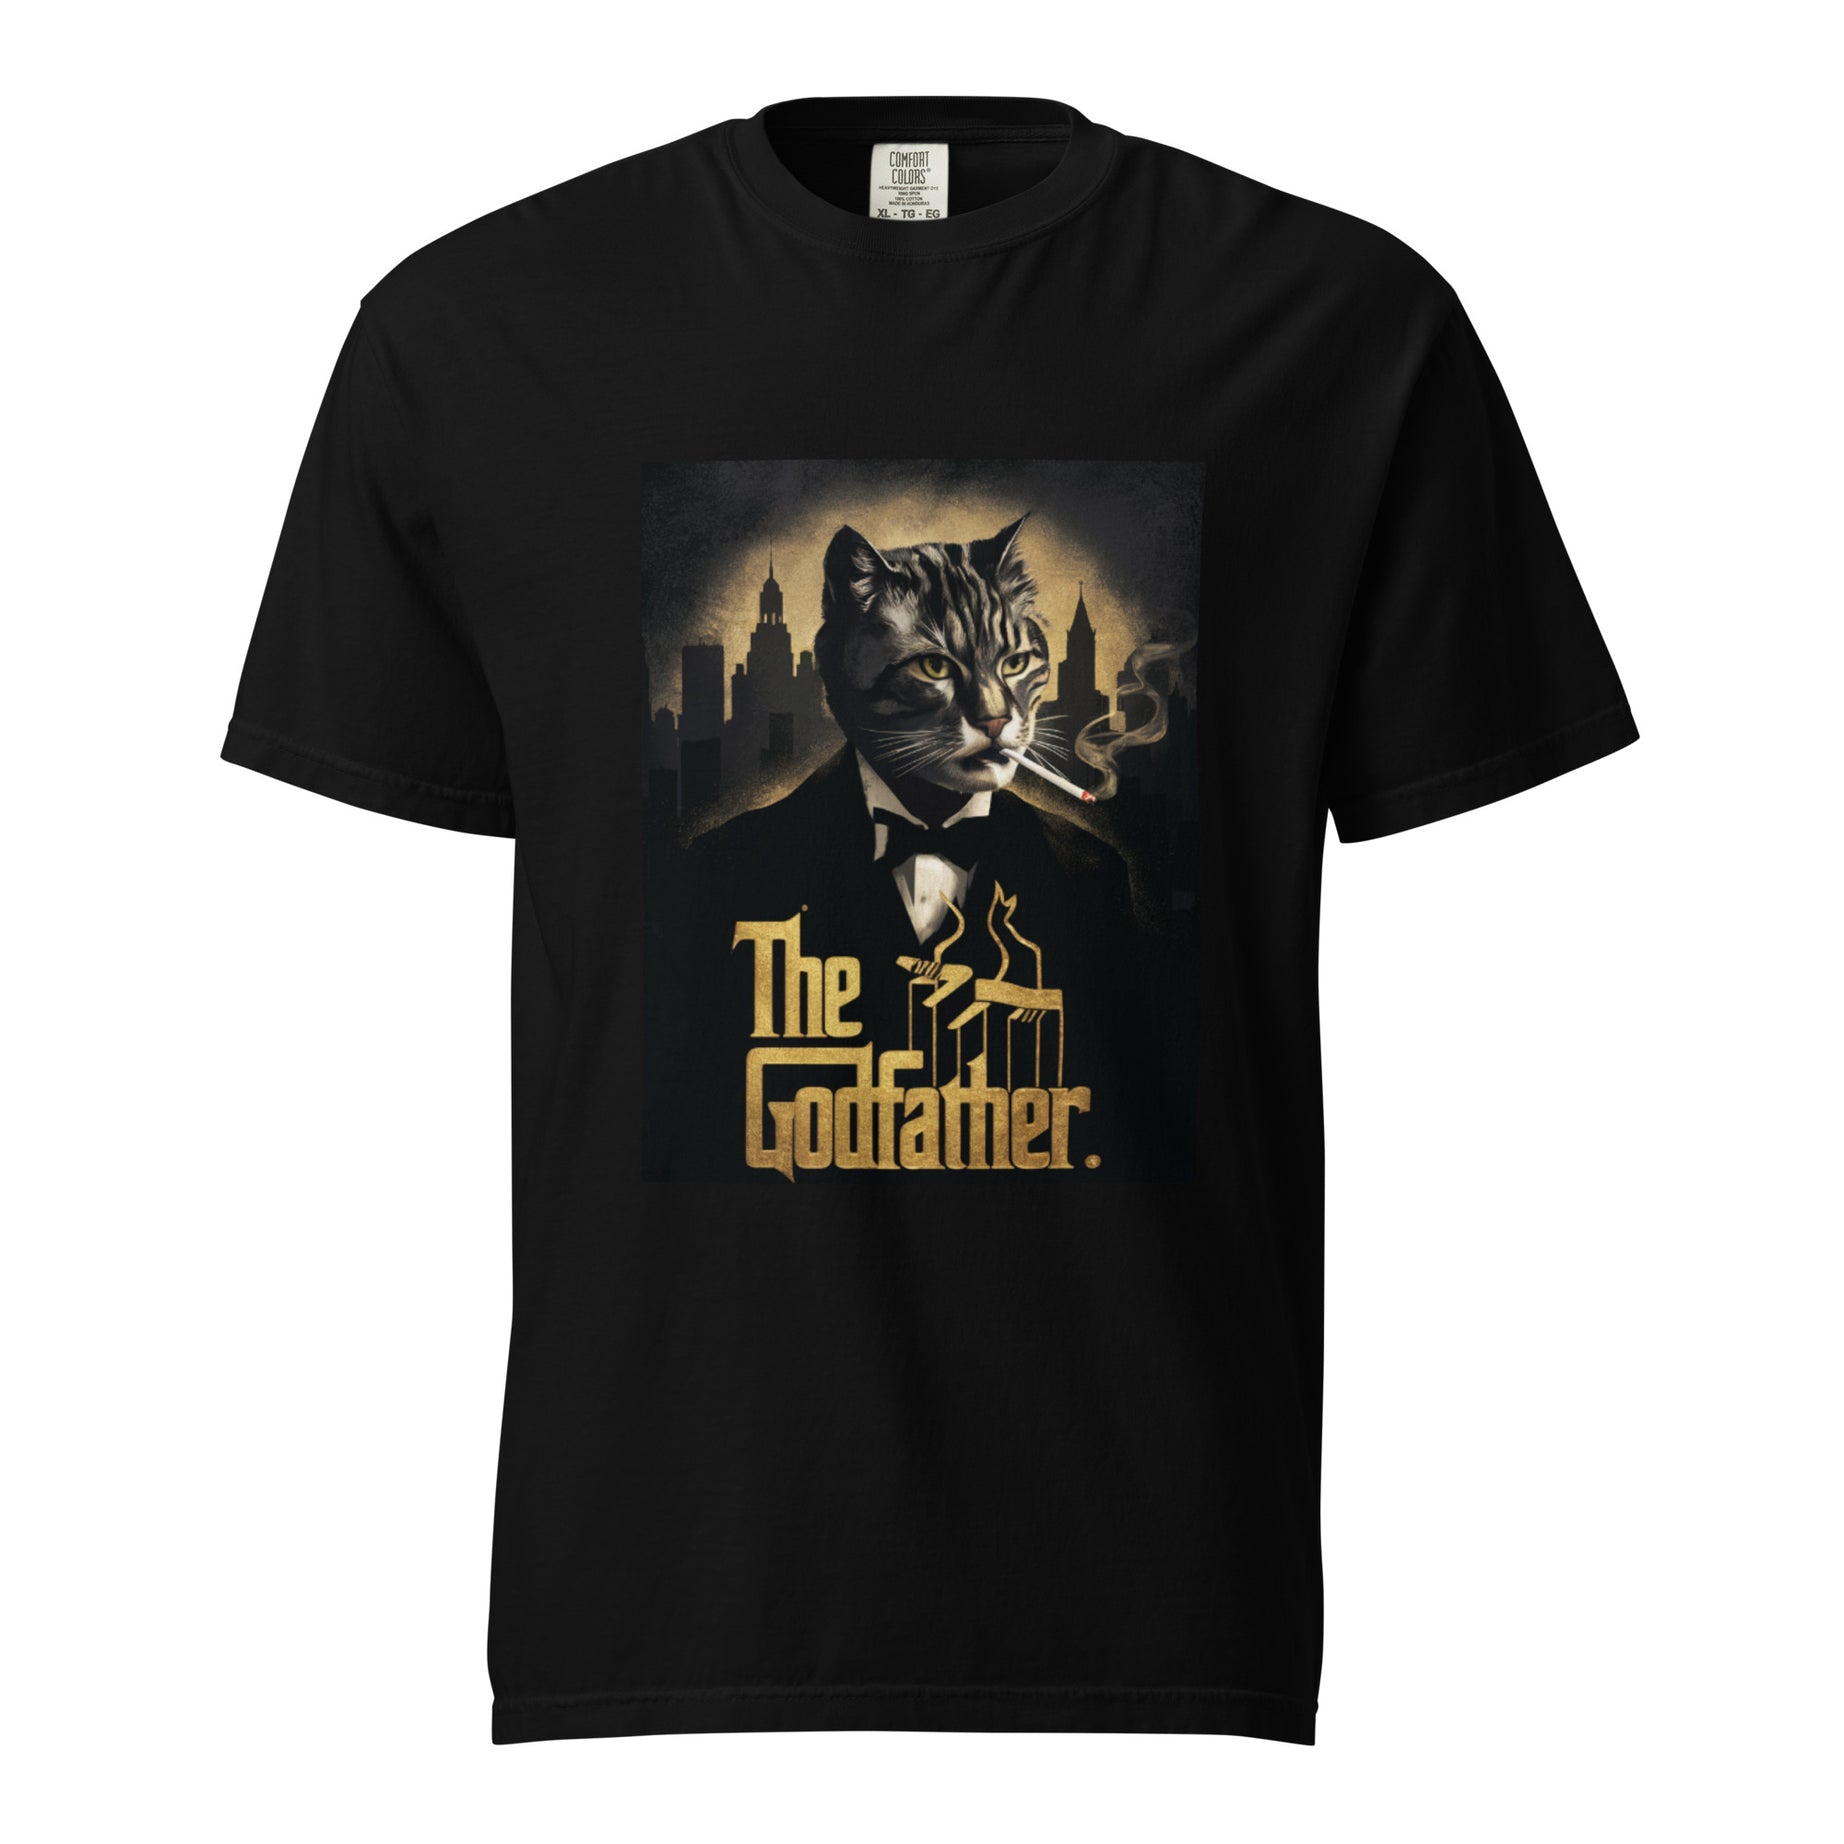 THE GOD FATHER T-SHIRT